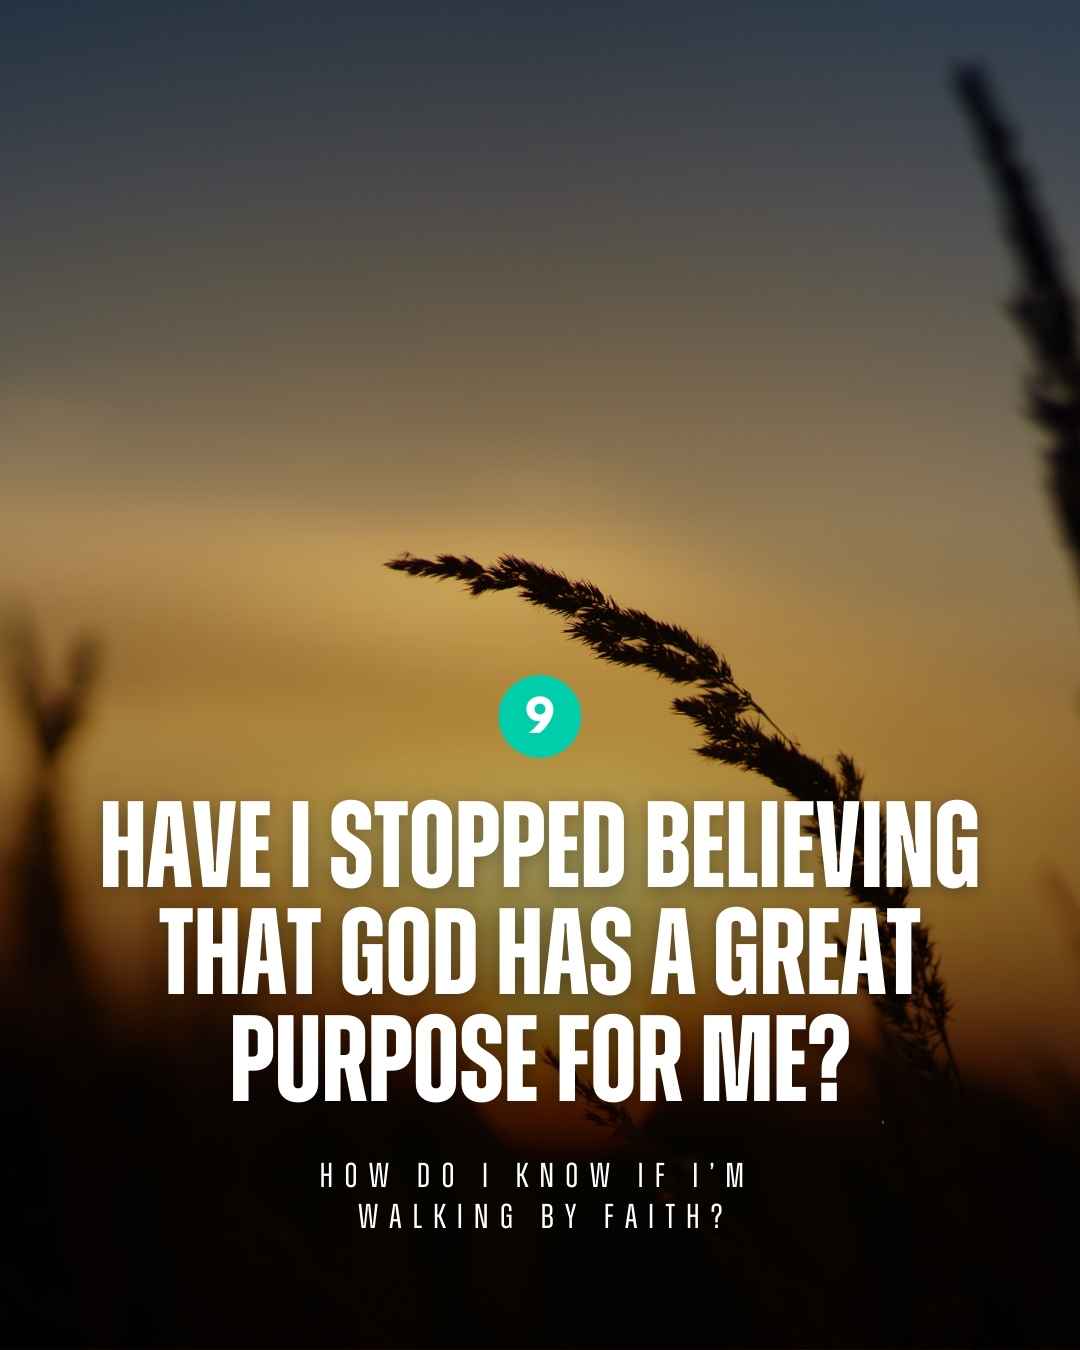 Walk by faith - Have I stopped believing that God has a great purpose for me?